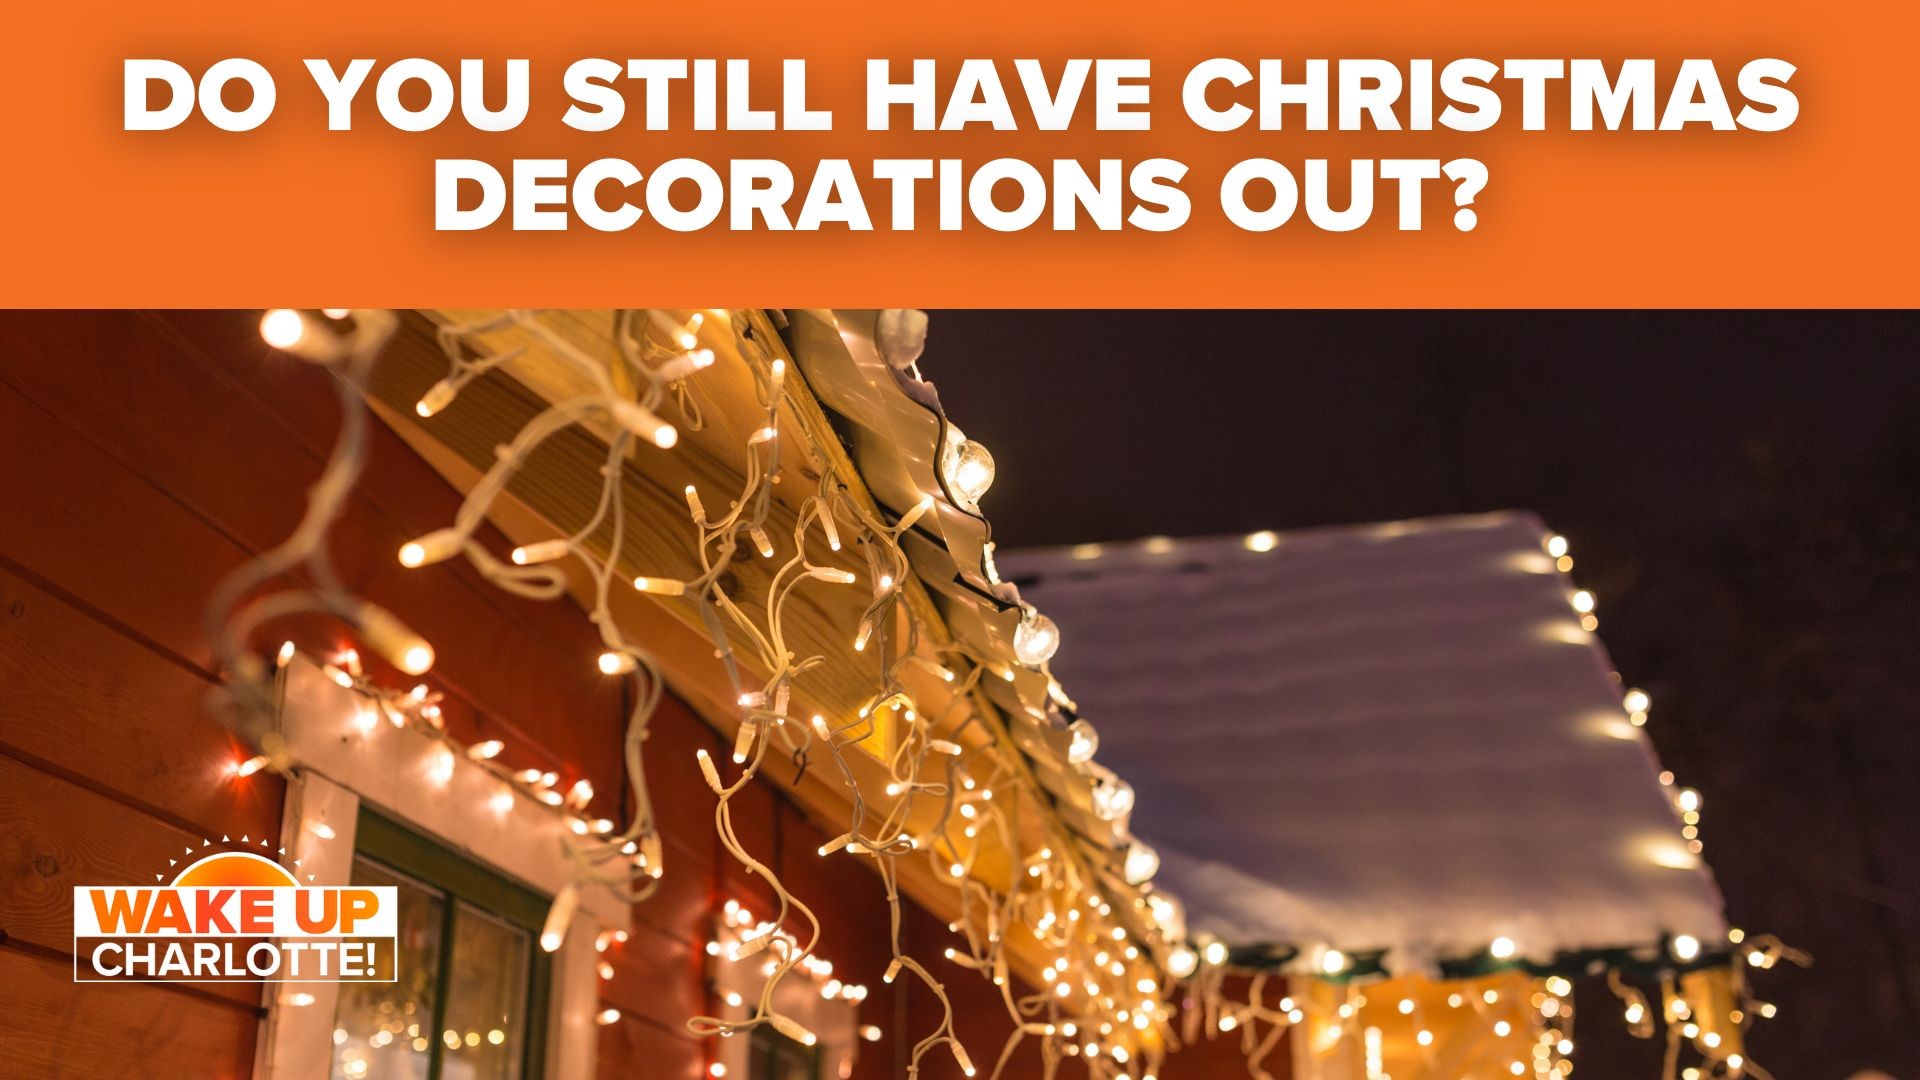 A recent survey found that 41% of Americans still have at least some Christmas decorations up. When do you undeck the halls at your house?